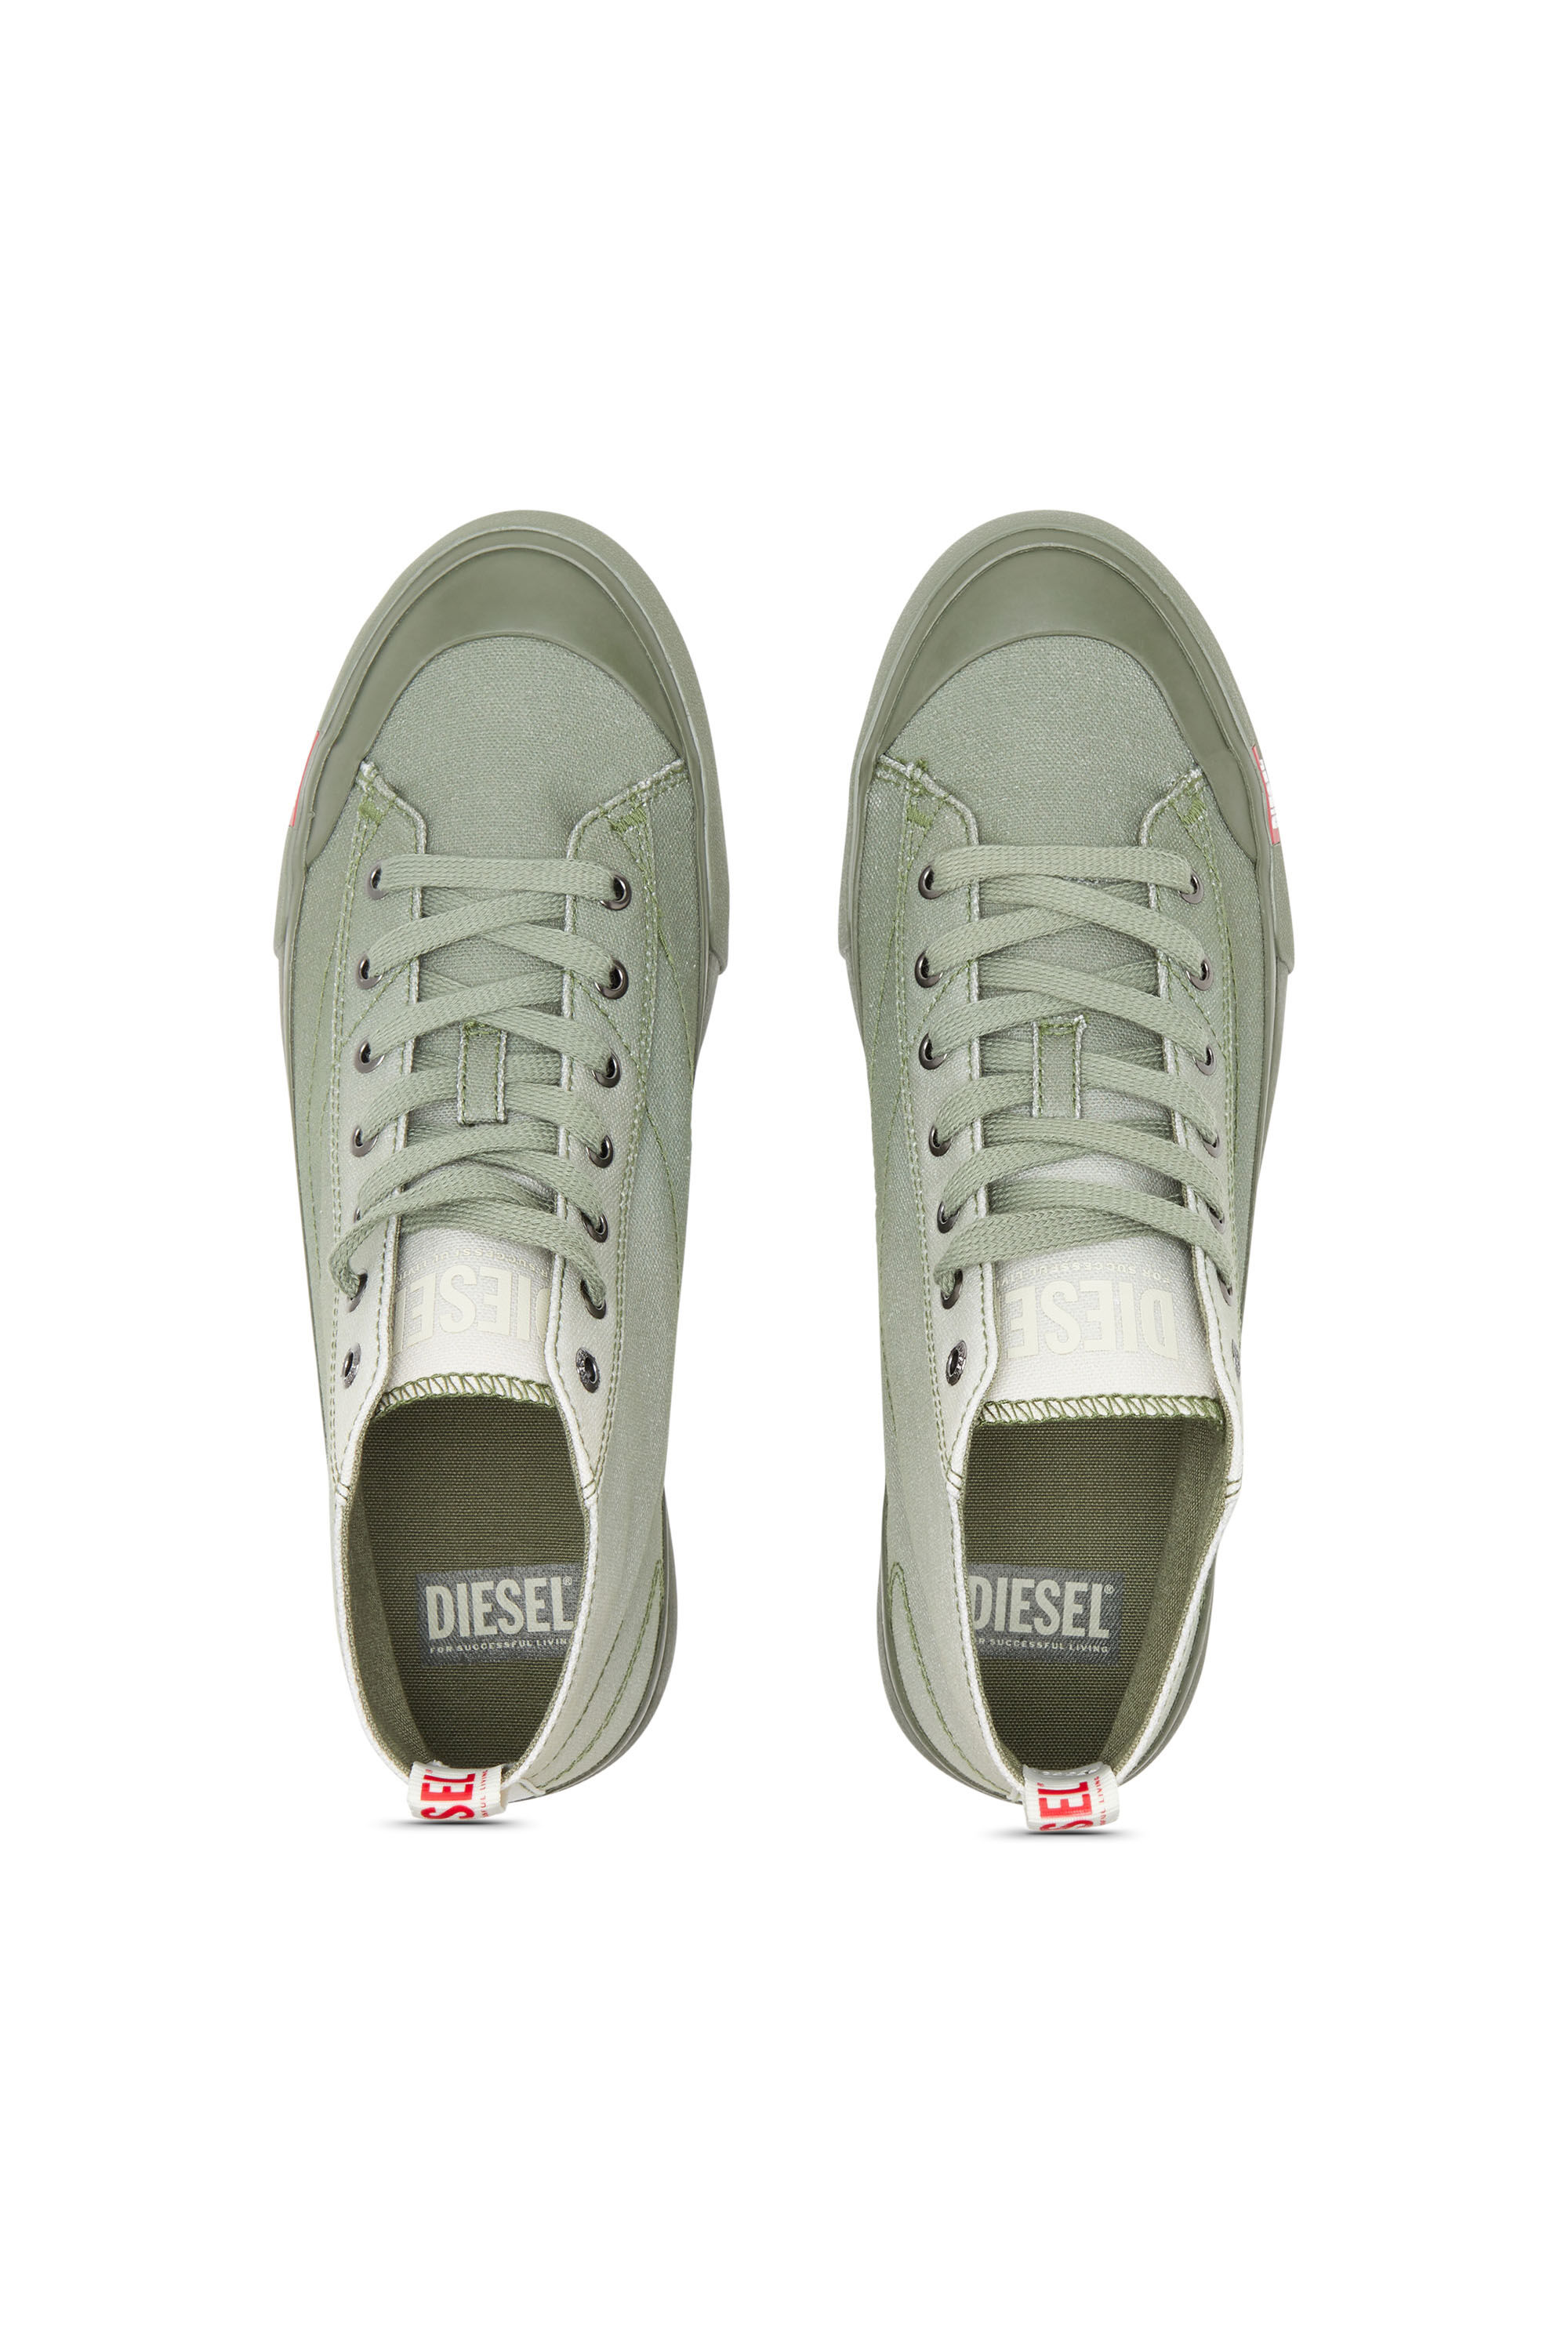 Diesel - S-ATHOS MID, Man S-Athos Mid-High-top sneakers in faded canvas in Multicolor - Image 4